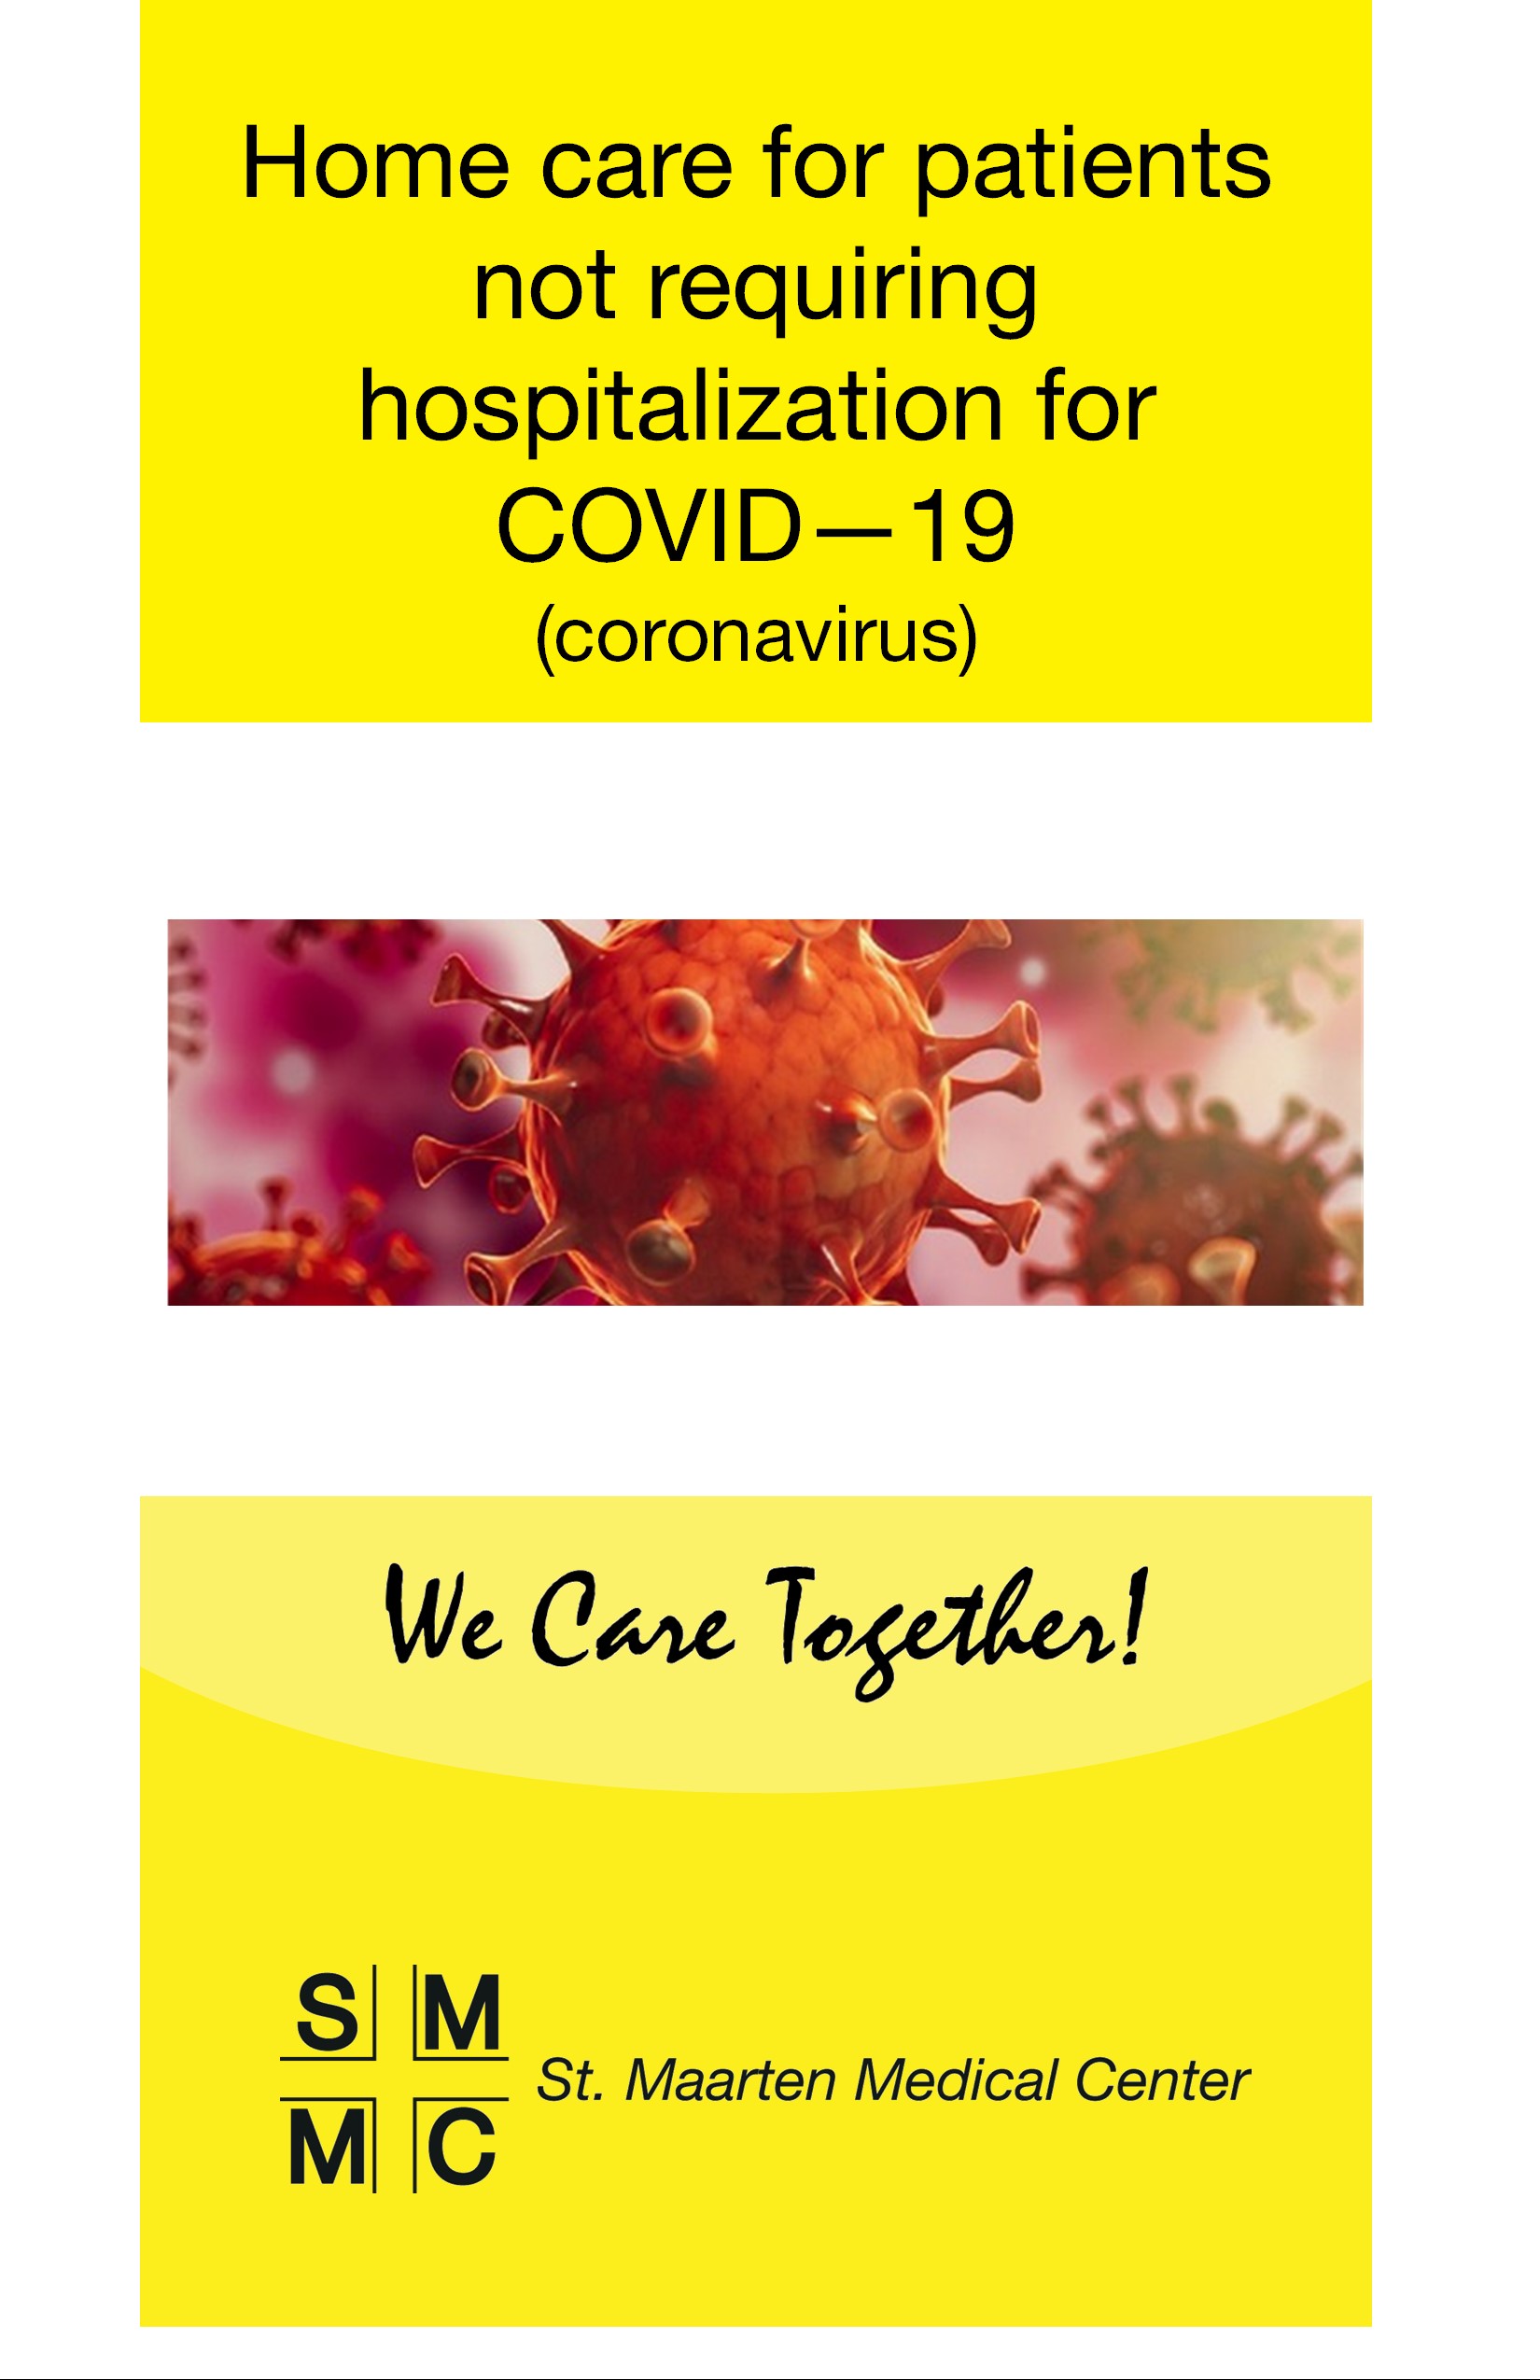 COVID-19 - Caring for patients who do not require hospitalisation